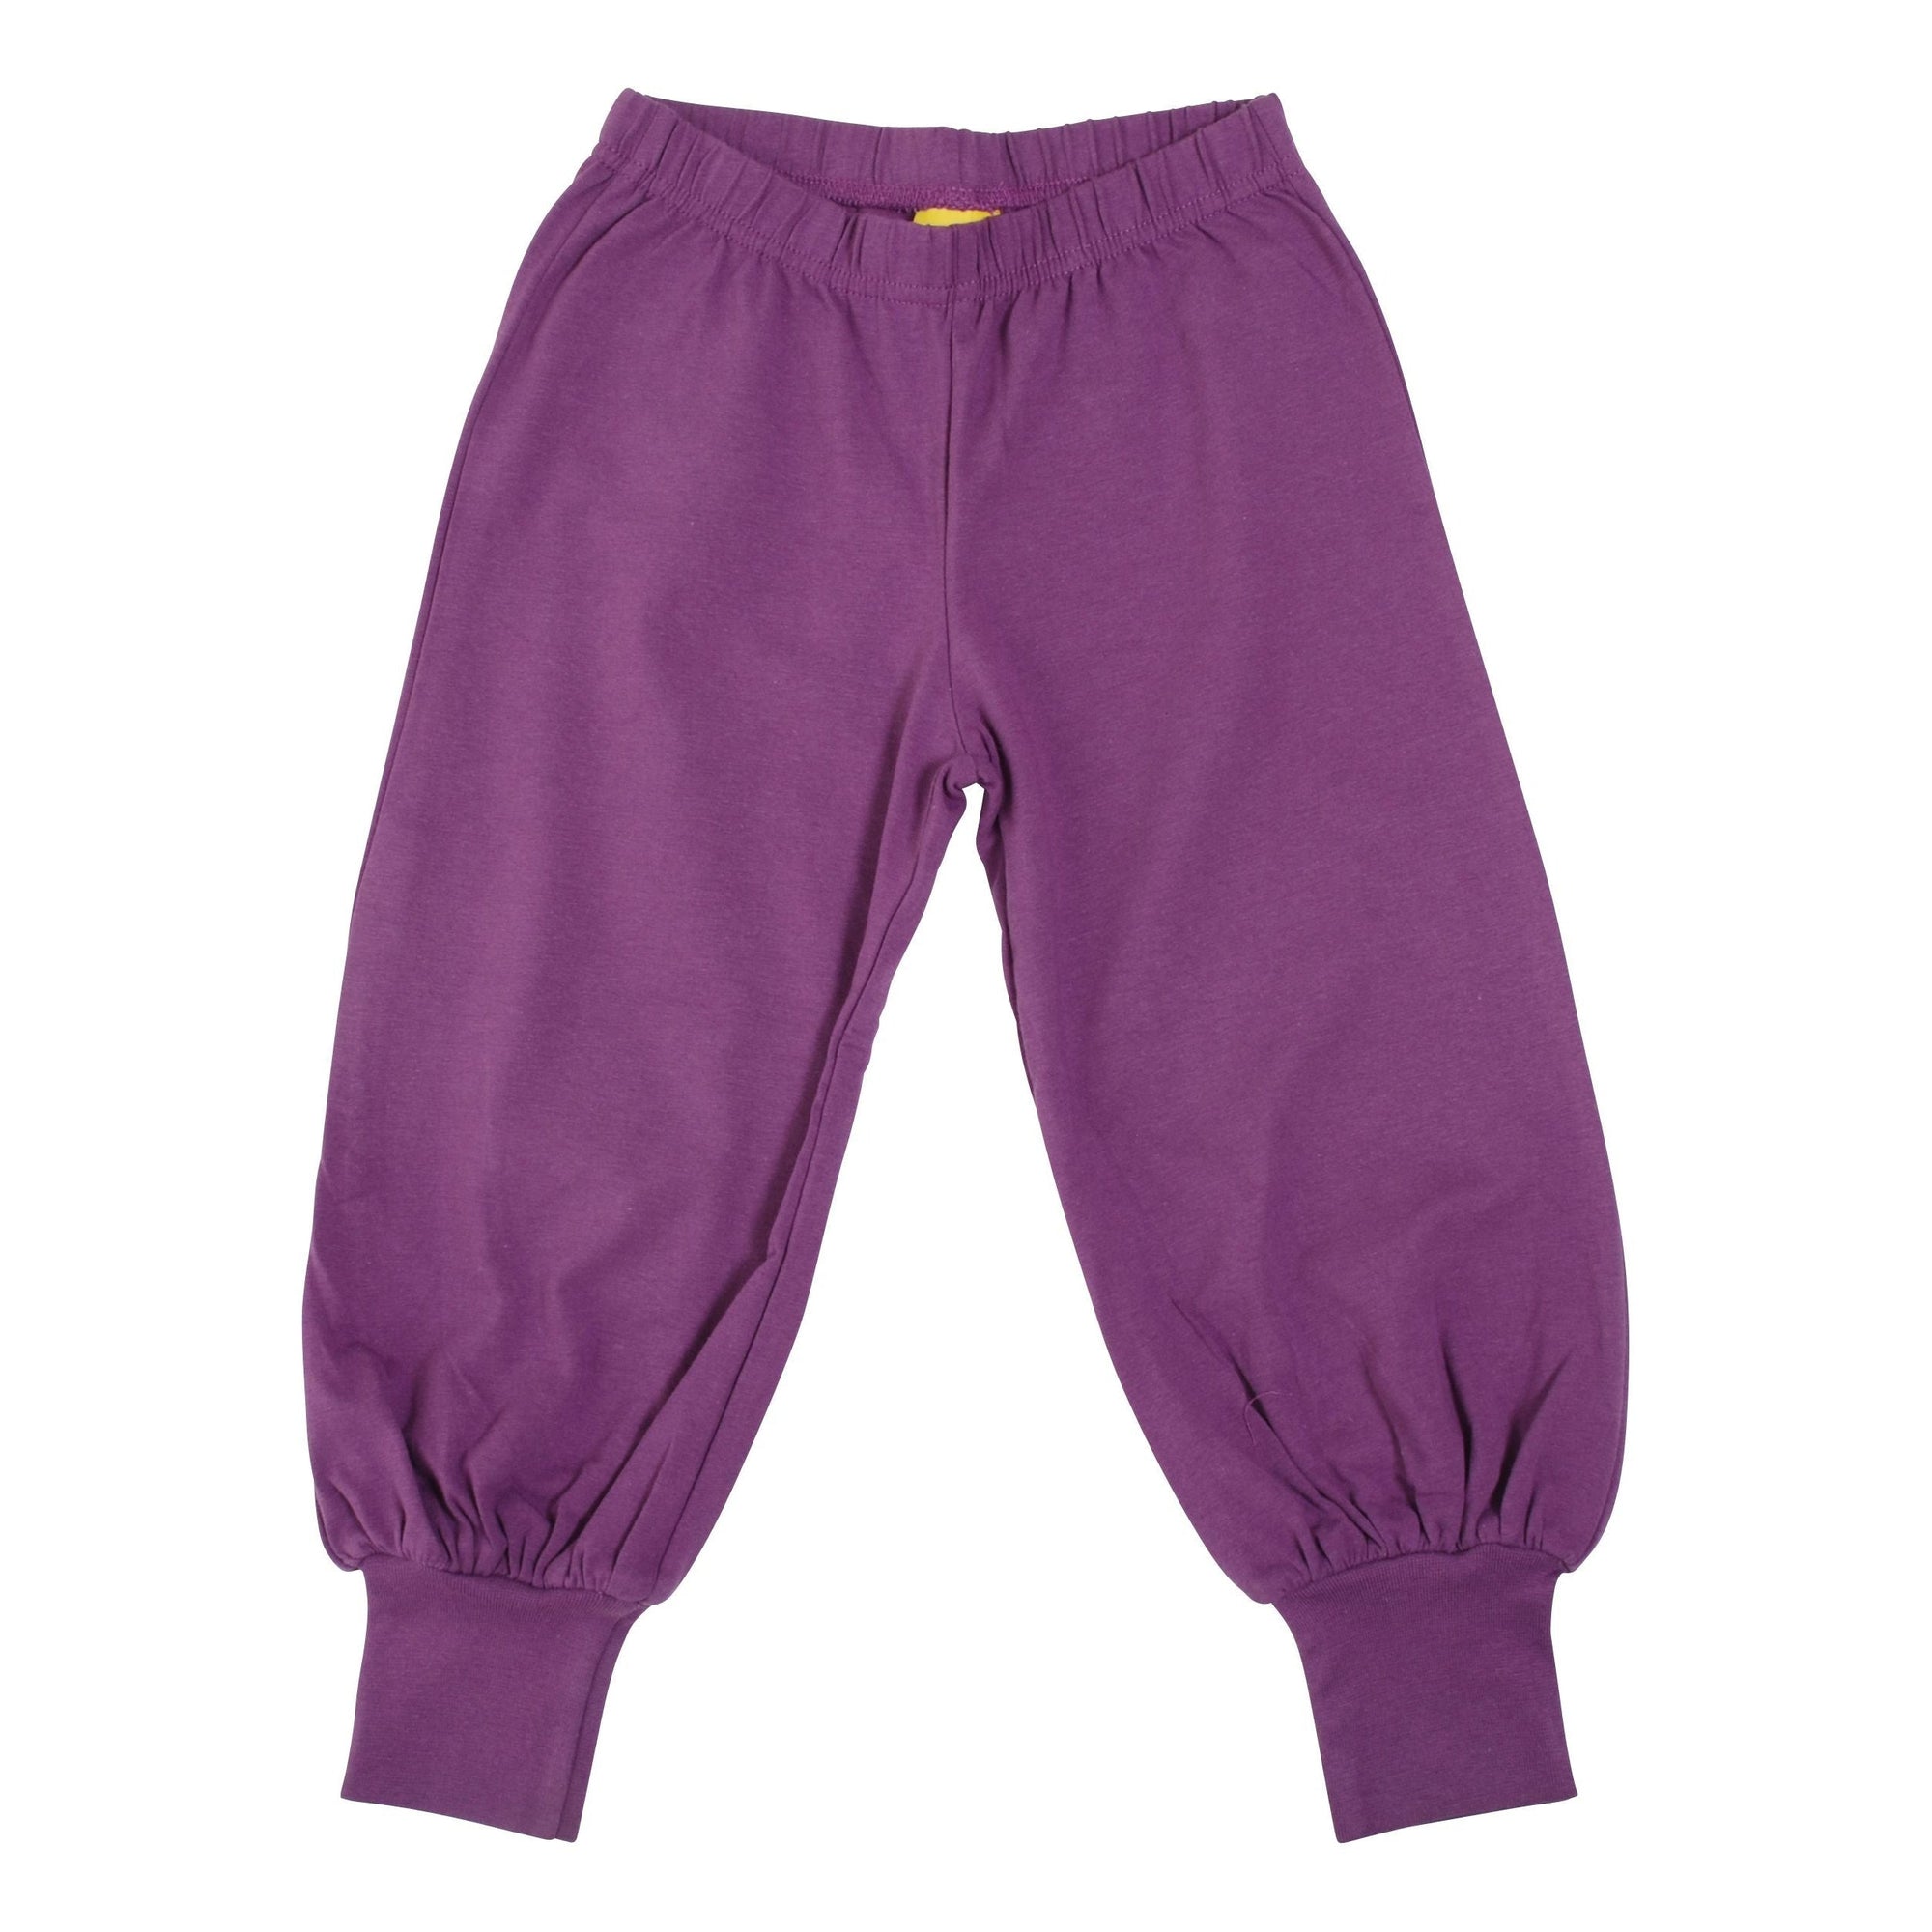 Crushed Grape Baggy Pants - 2 Left Size 12-14 years-More Than A Fling-Modern Rascals